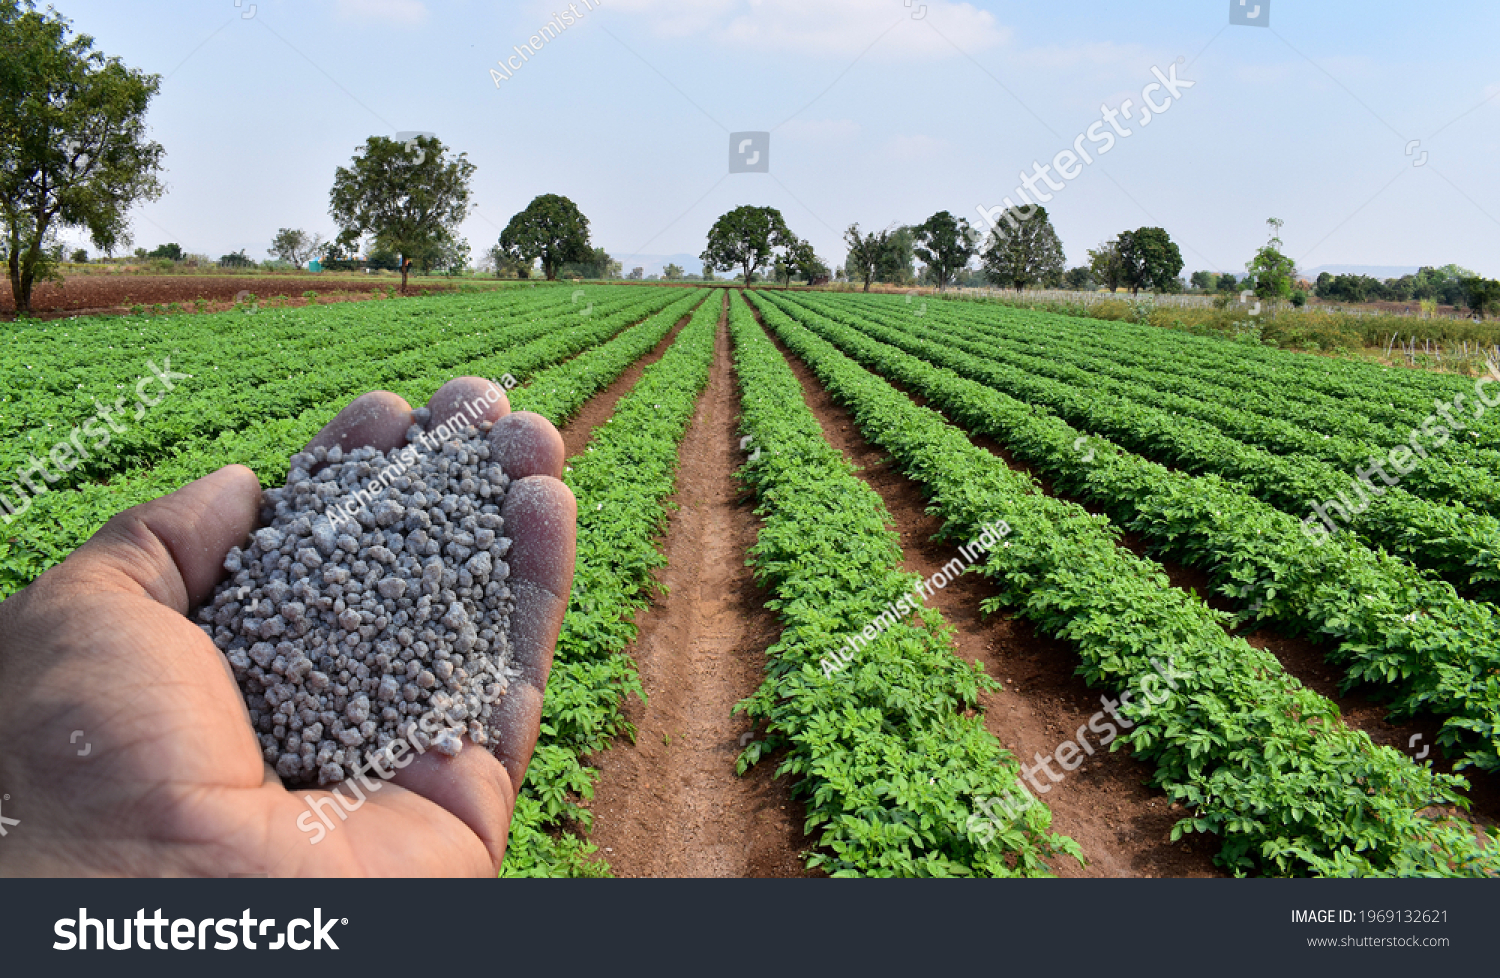 Hand holding agriculture fertilizer or fertiliser granules with background of farm or field. Concept of role and importance of fertilisers in Agriculture. It plays vital role in plant growth.  #1969132621